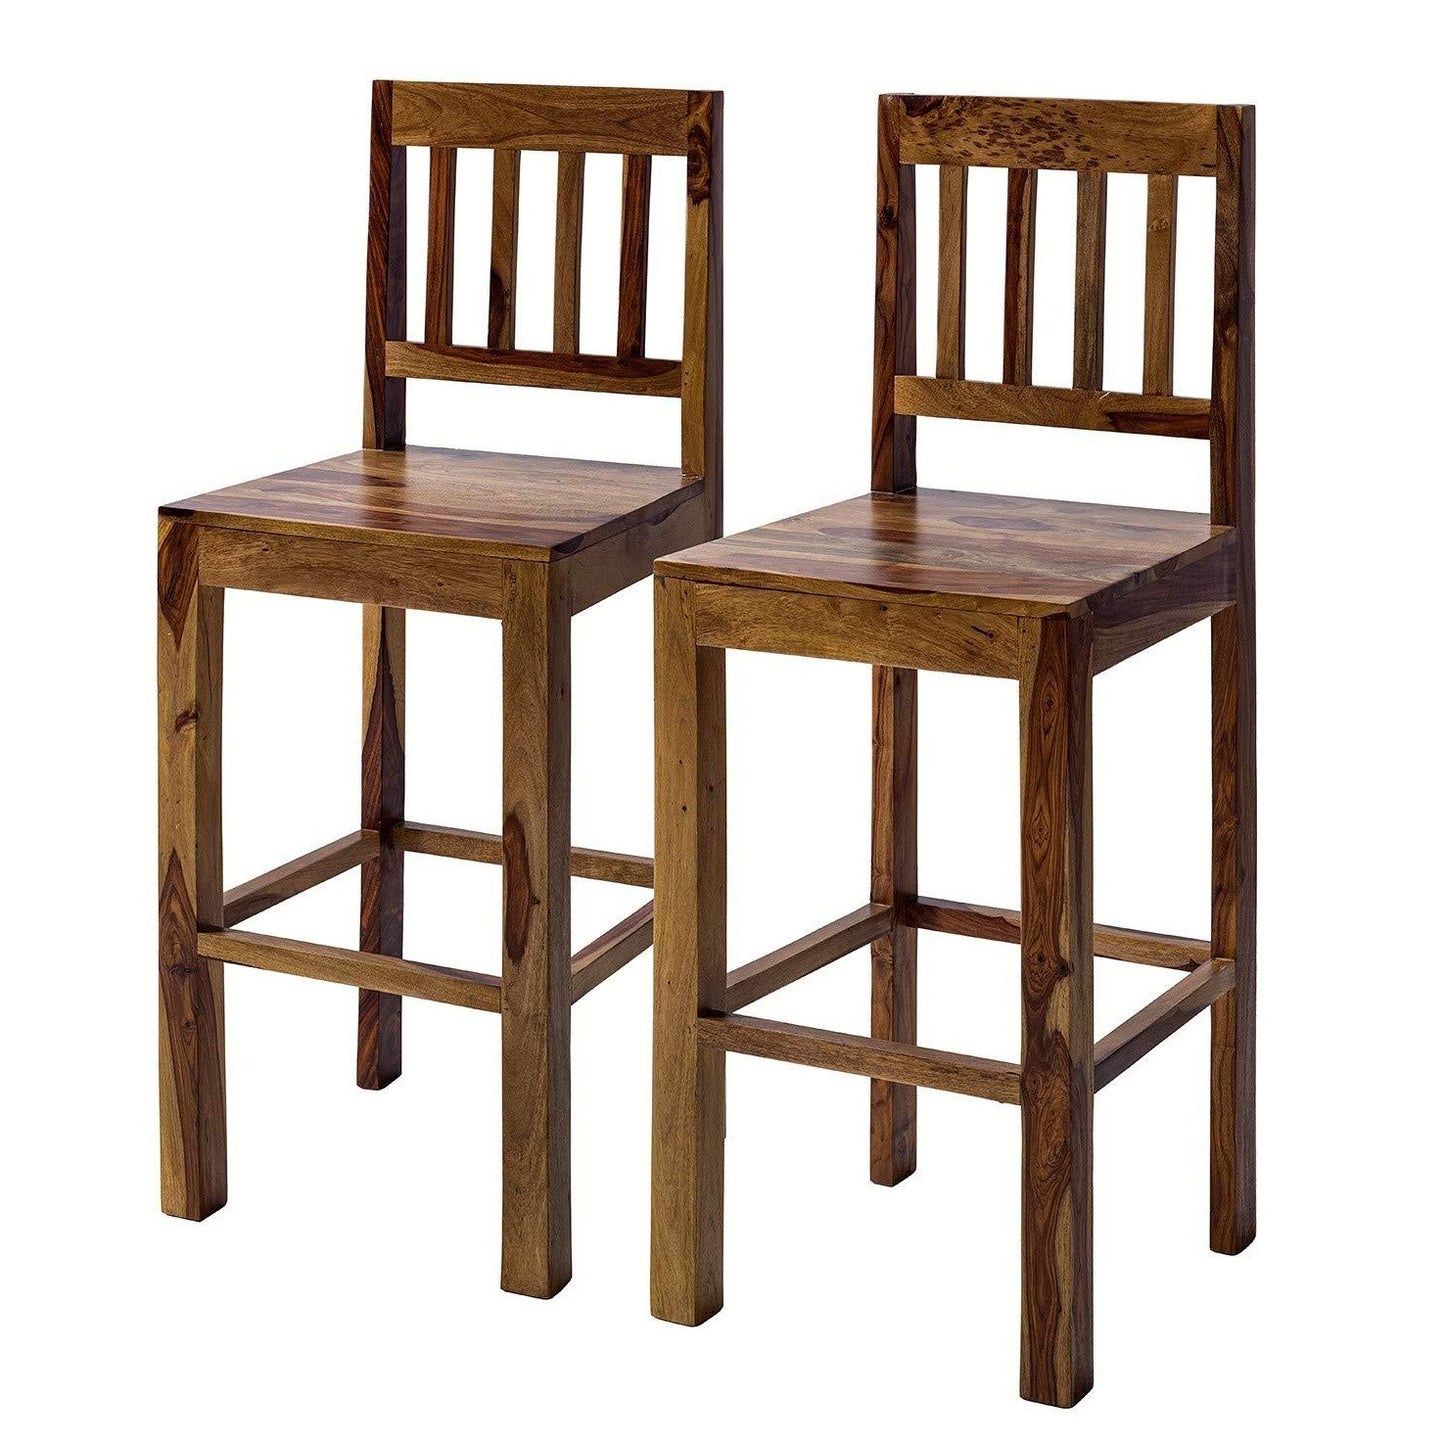 Bar chair set of two made of solid sheesham wood